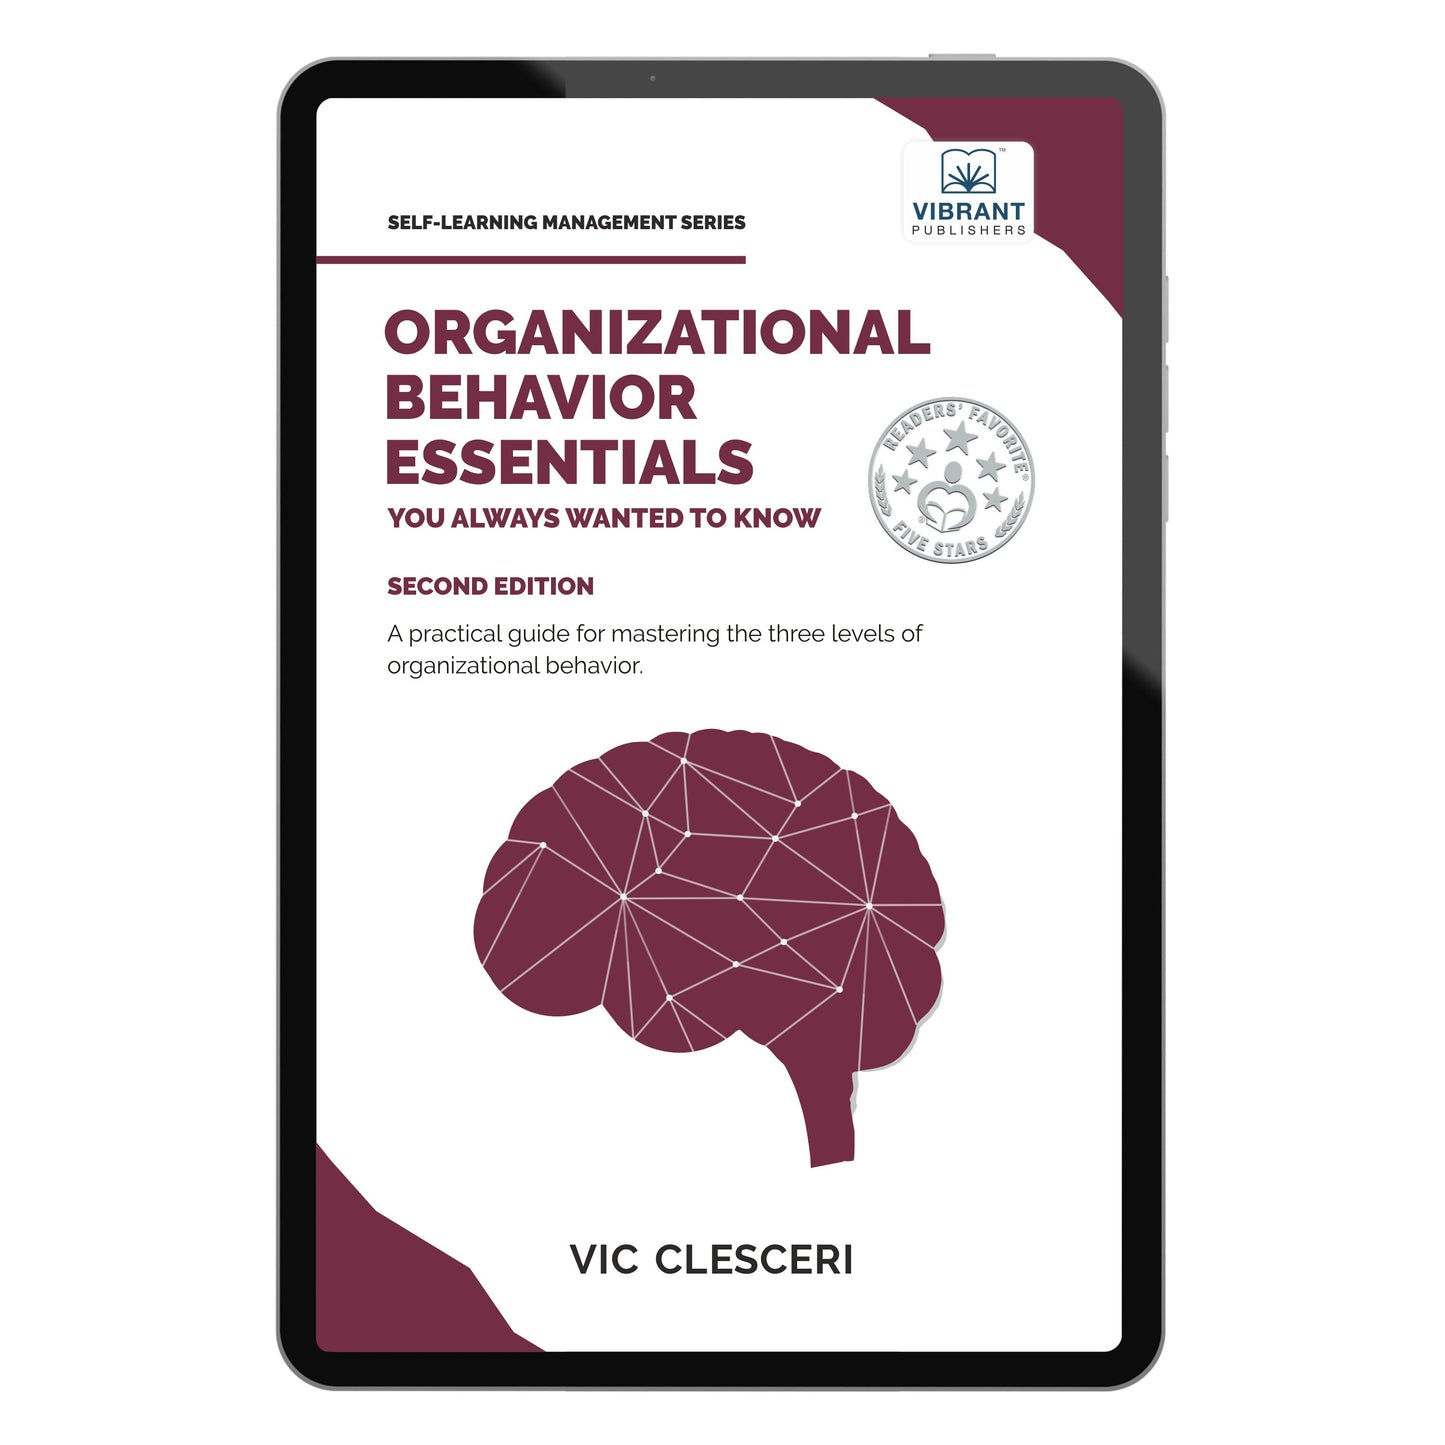 Organizational Behavior Essentials You Always Wanted To Know (2nd Edition)